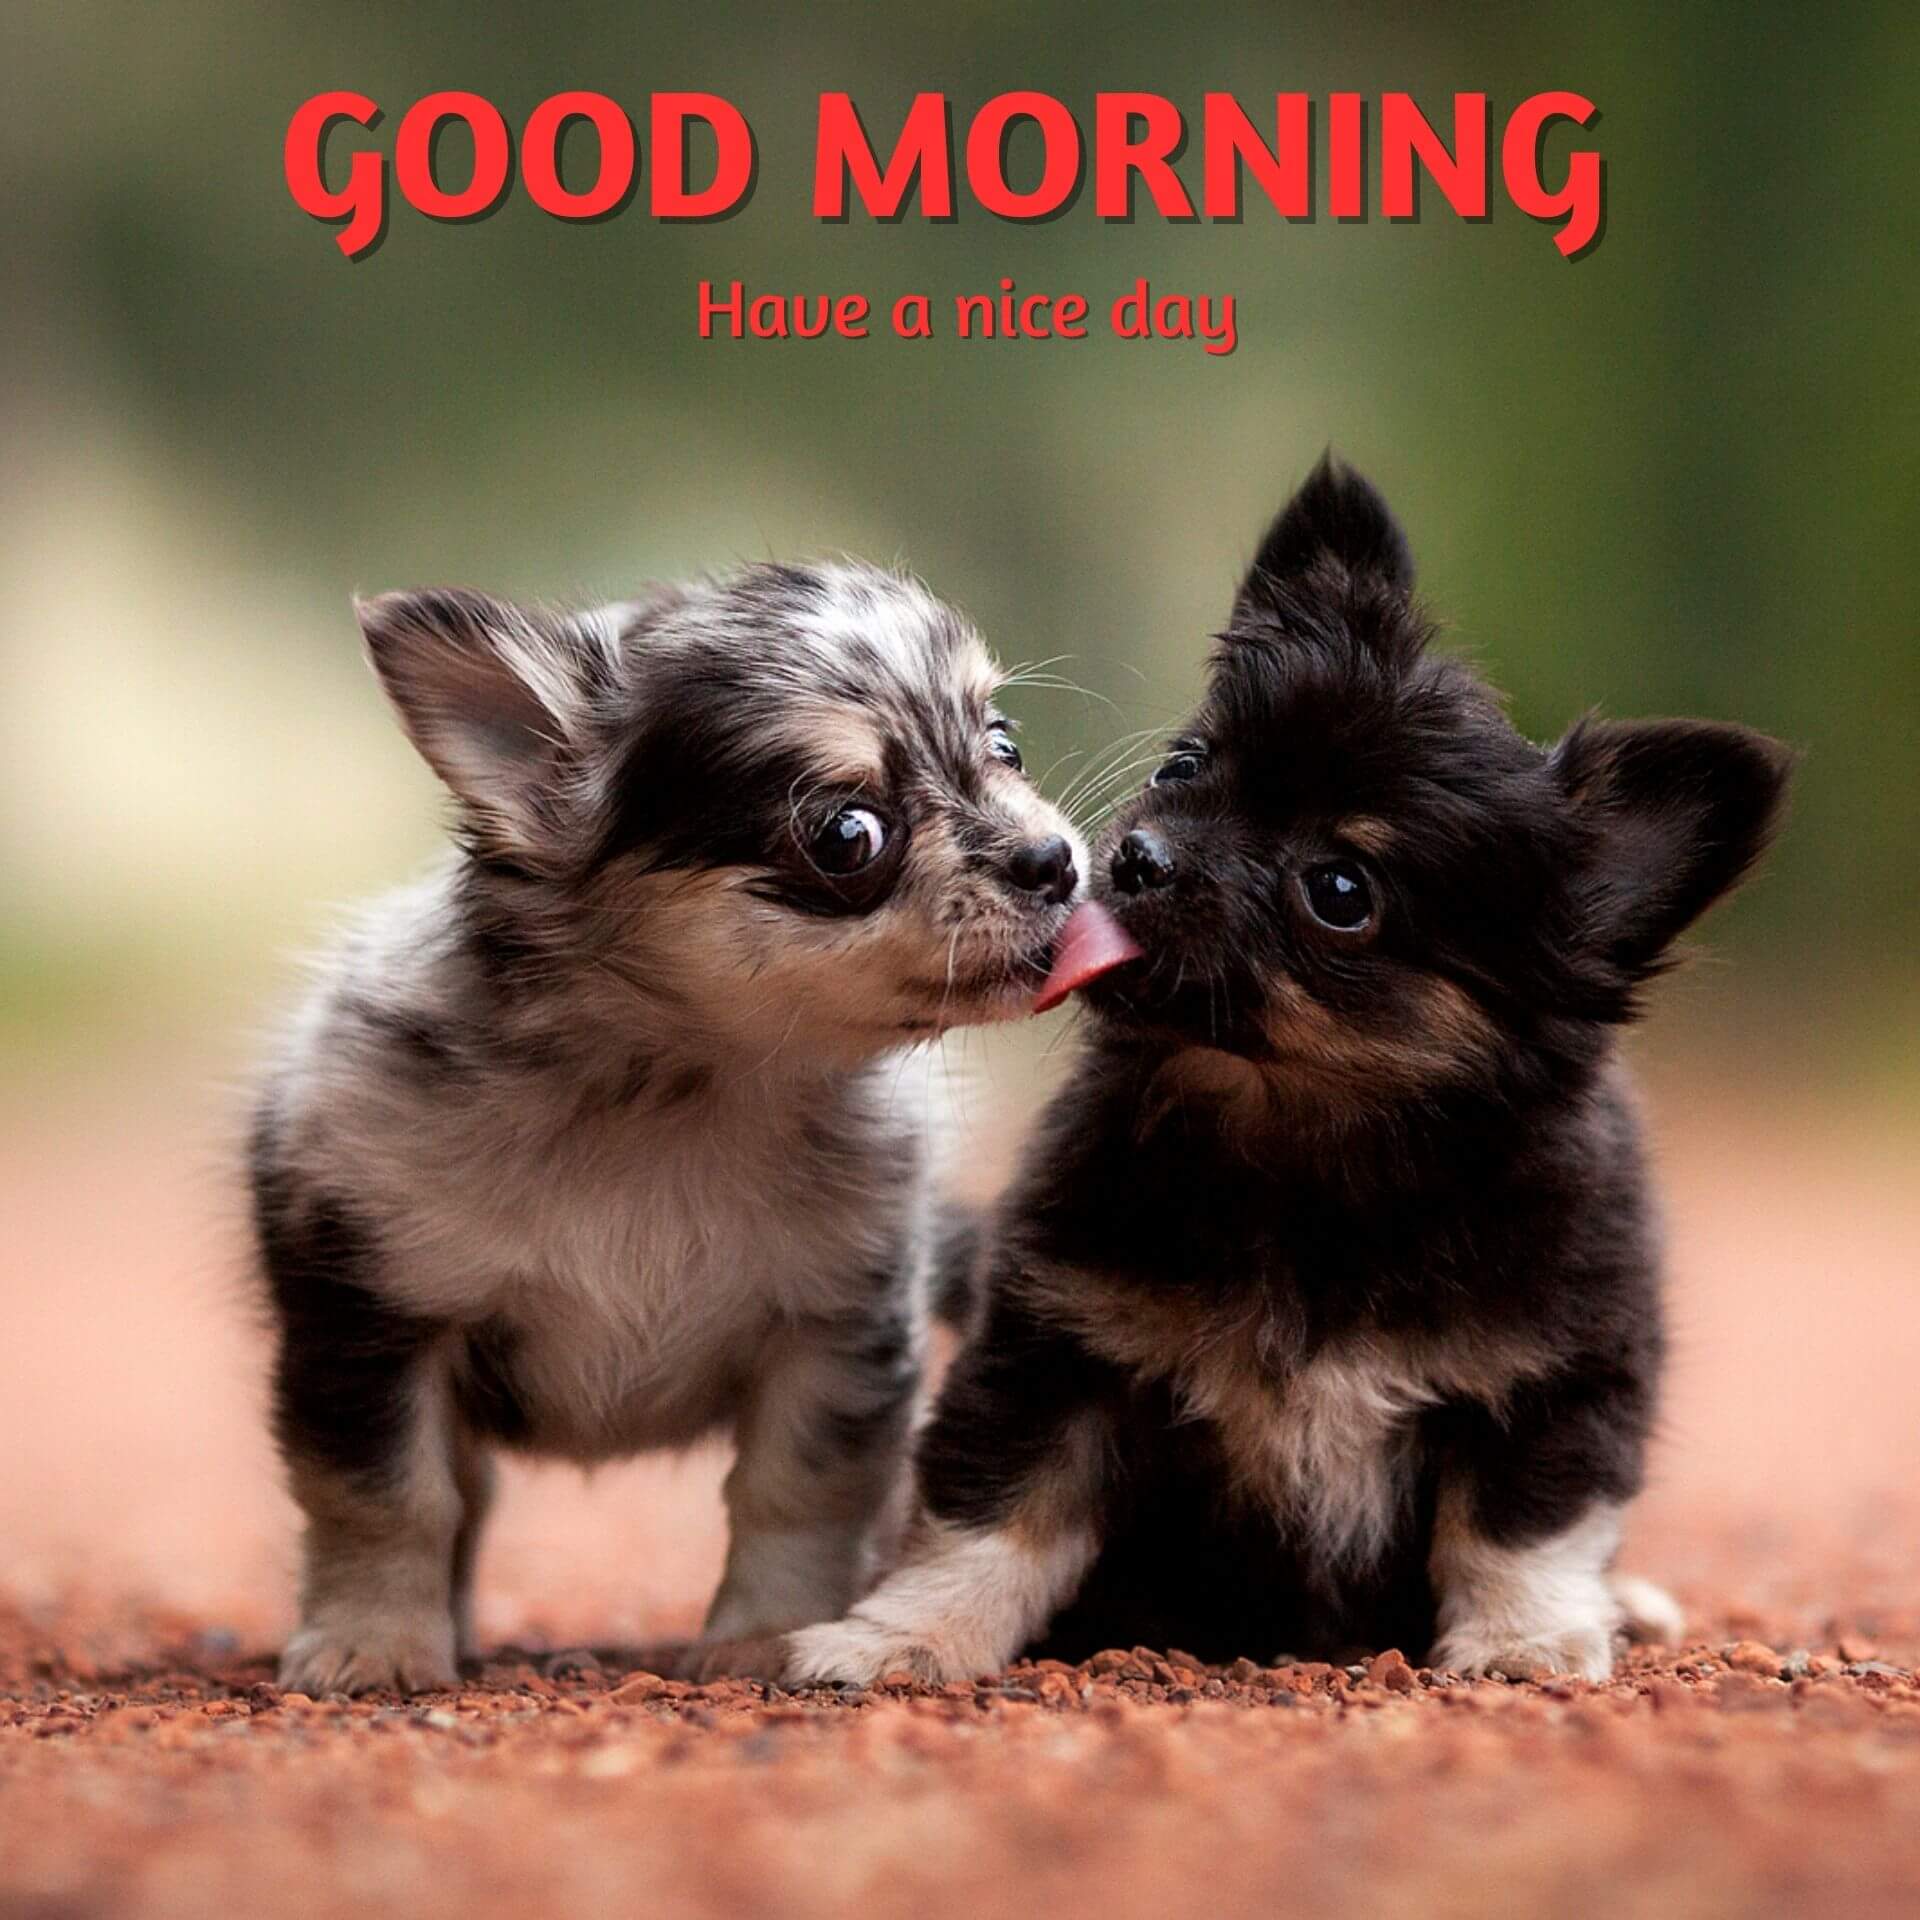 Cute Puppy Good Morning Images